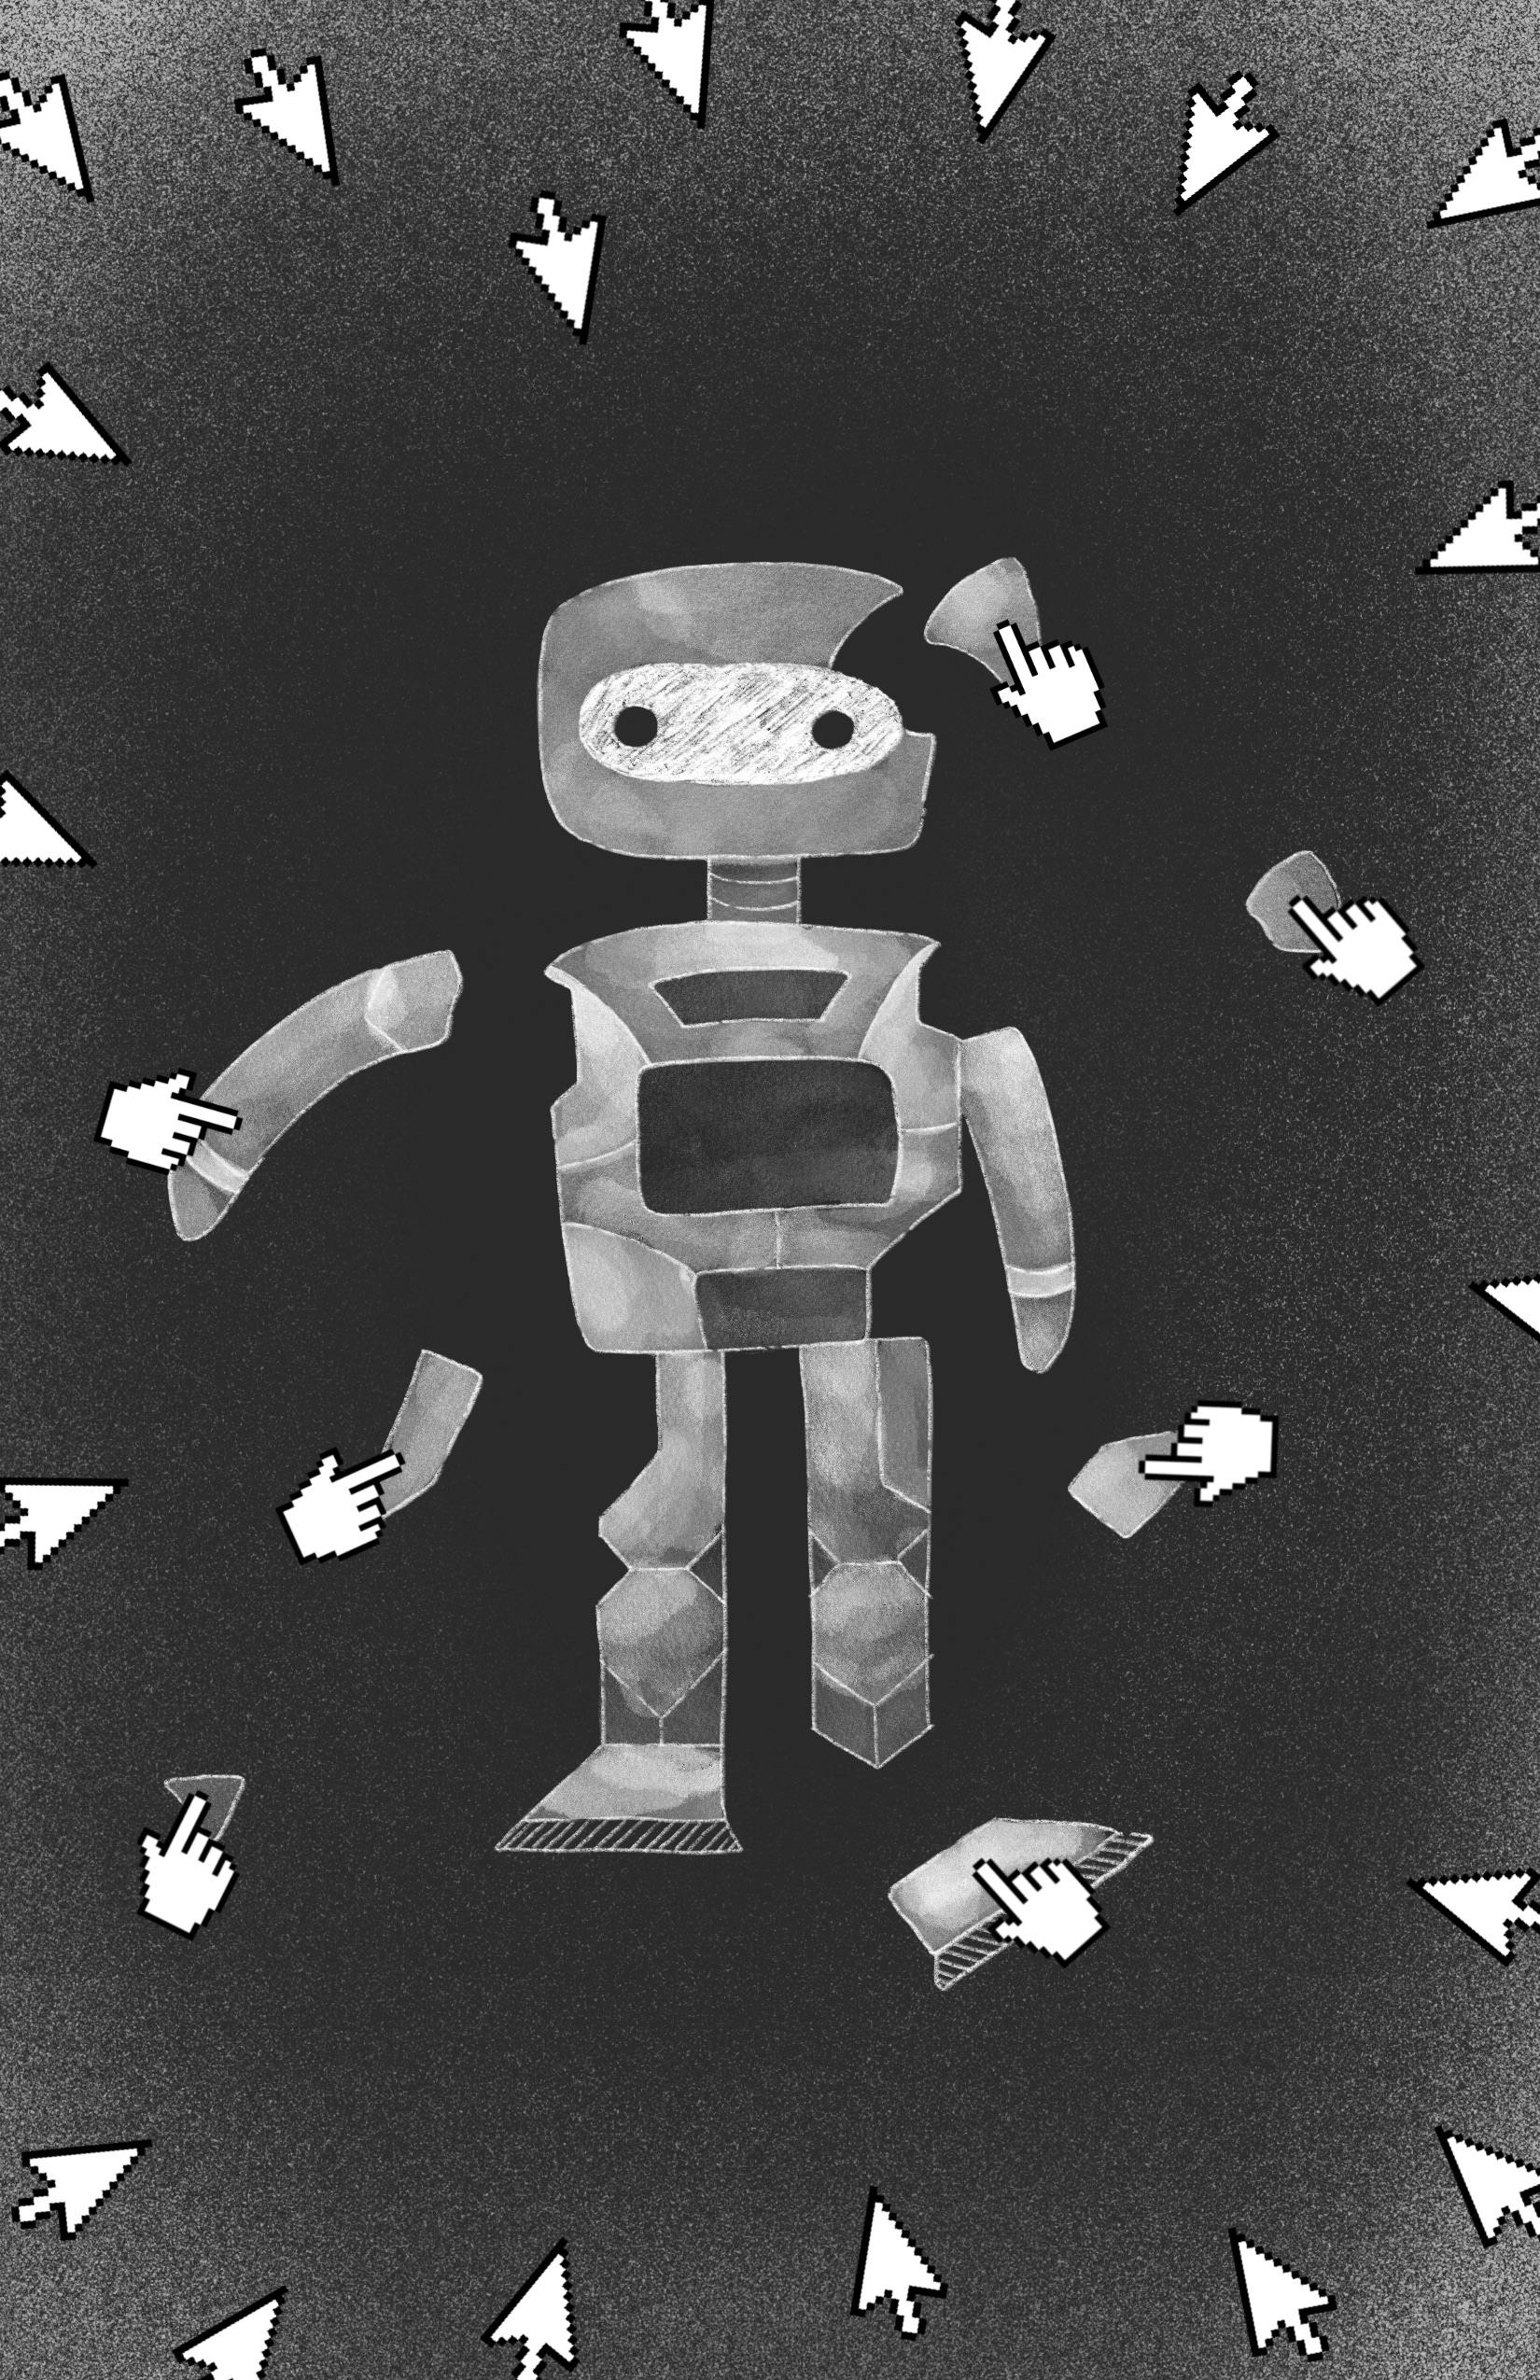 A robot is in the middle surrounded by various mouse cursors clicking on him, stealing variouys parts of his body